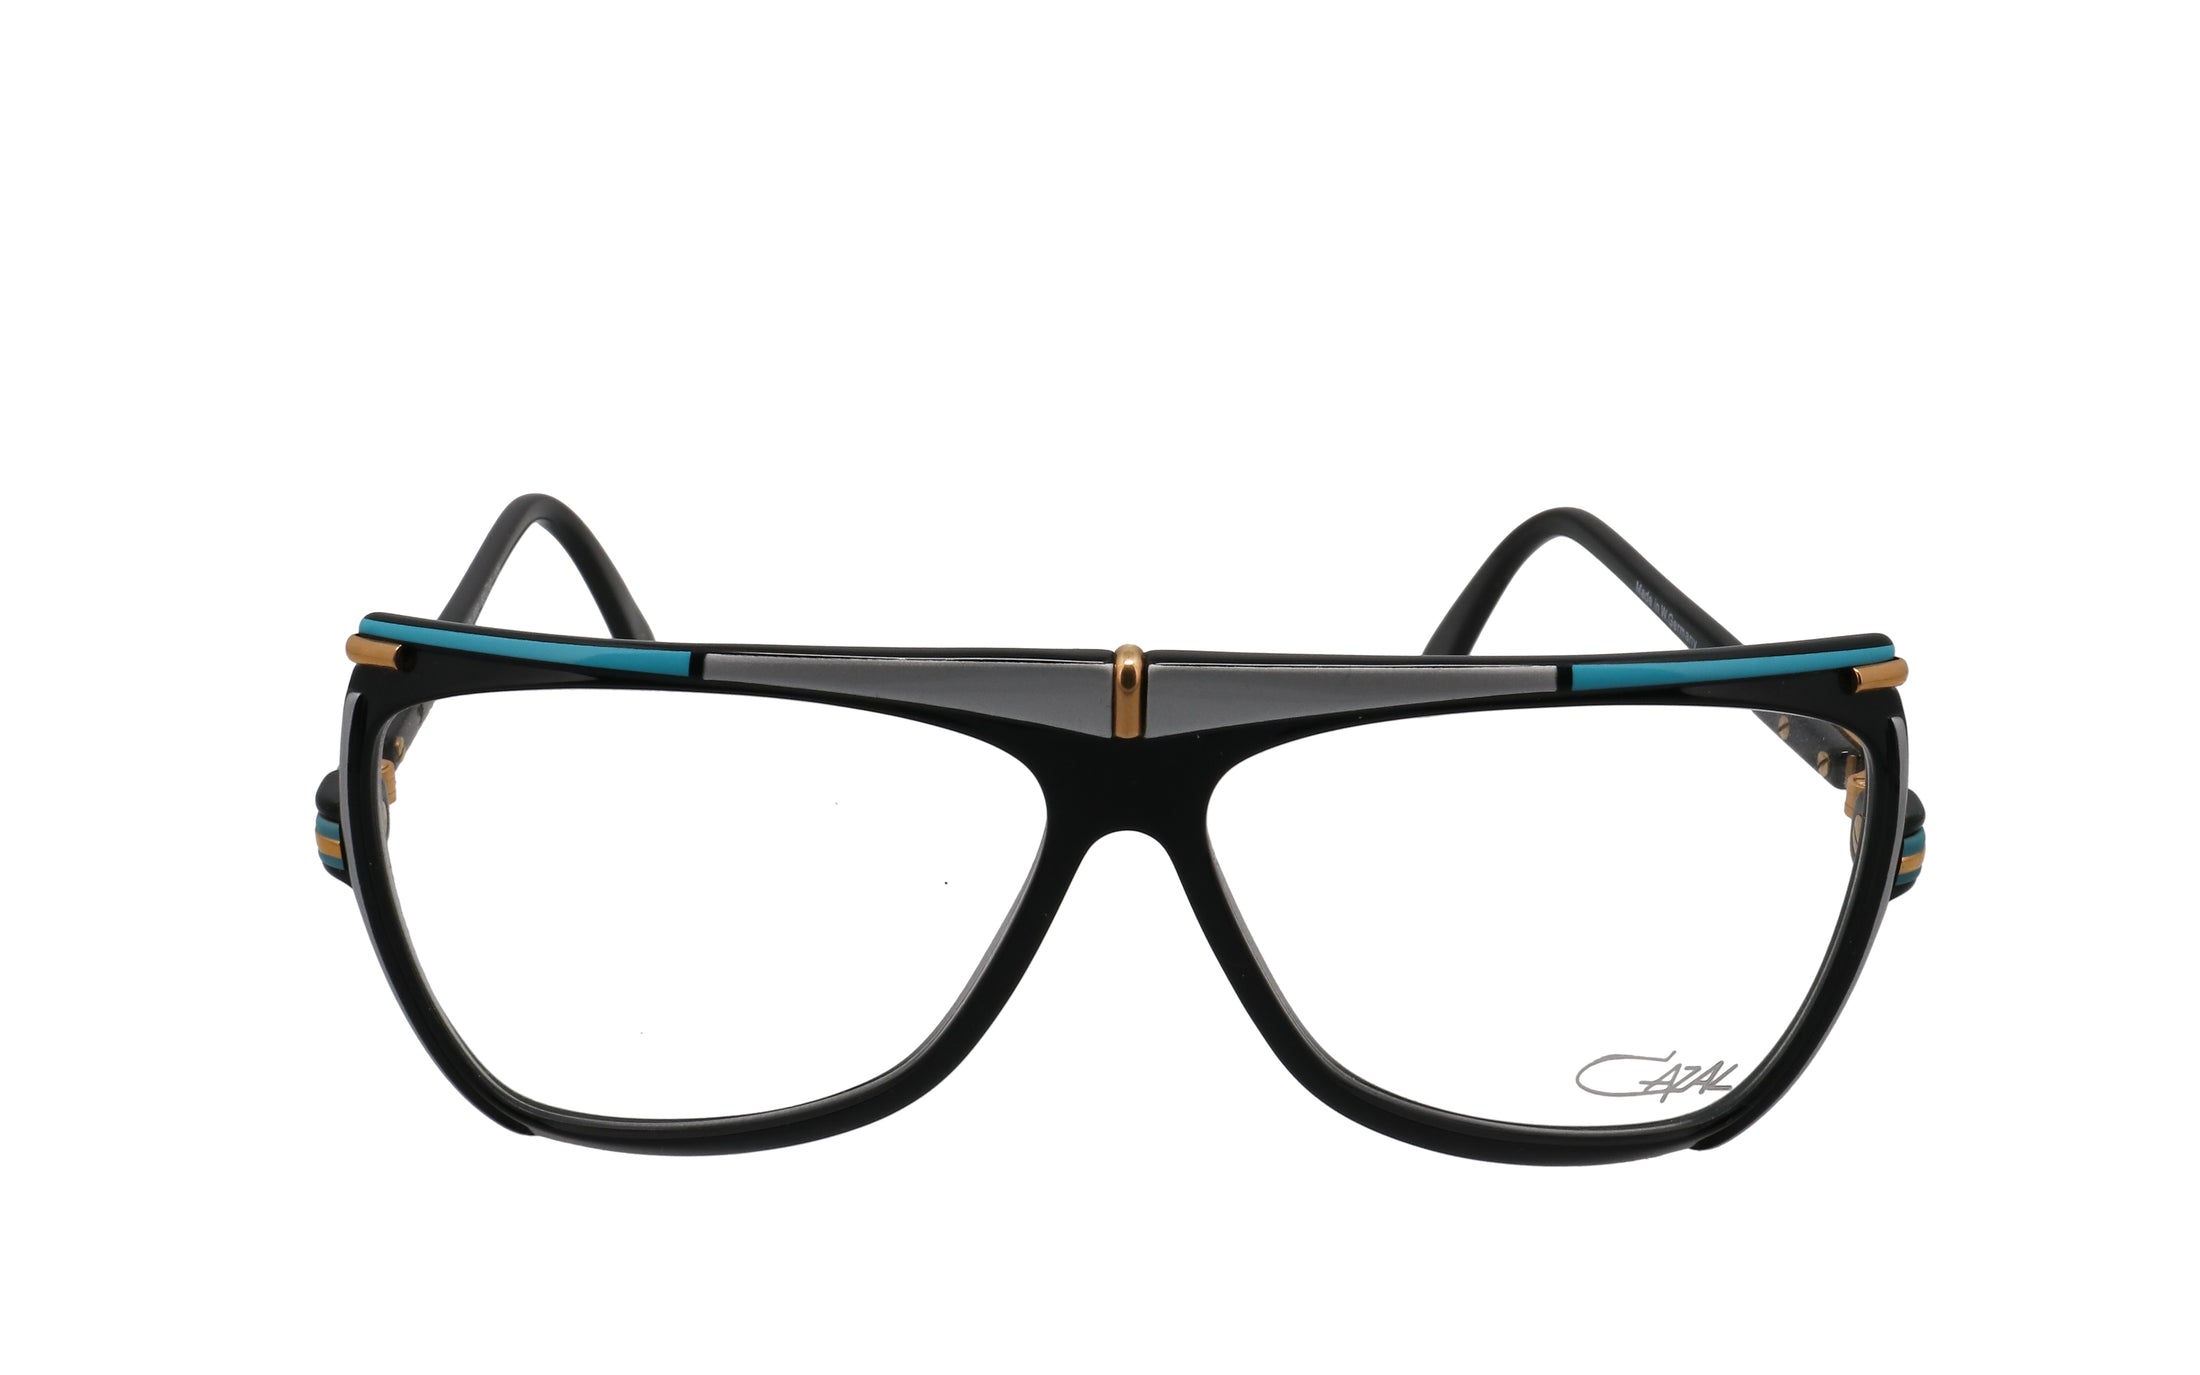 Chanel sunglasses with turquoise, gold and black square frames and black  lenses